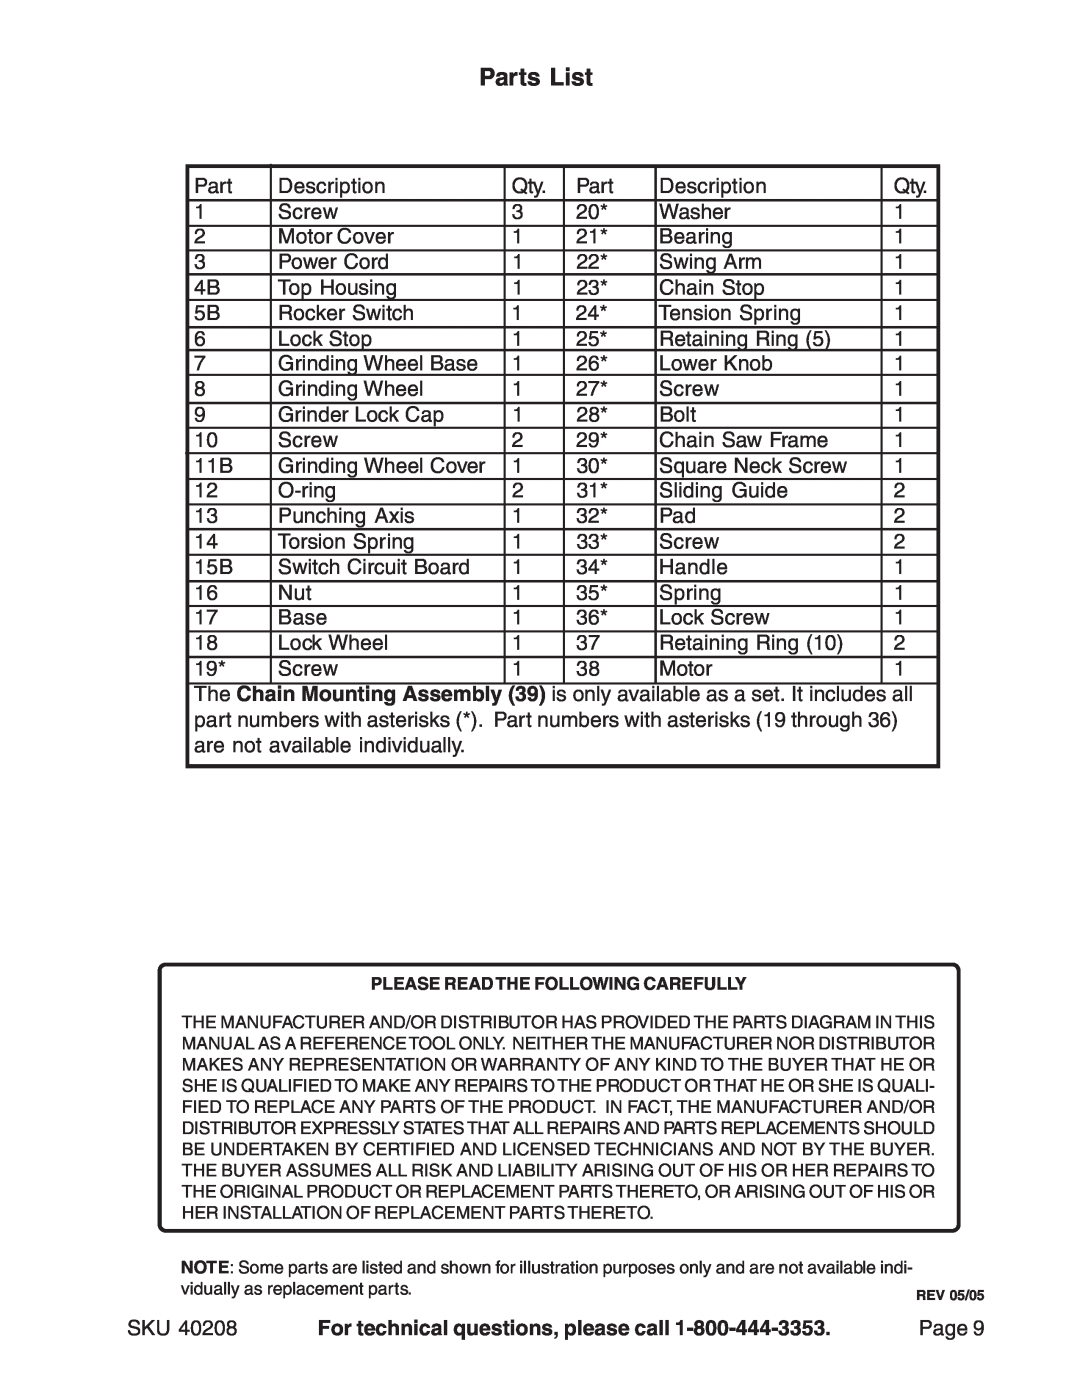 Harbor Freight Tools 40208 manual Parts List, For technical questions, please call 